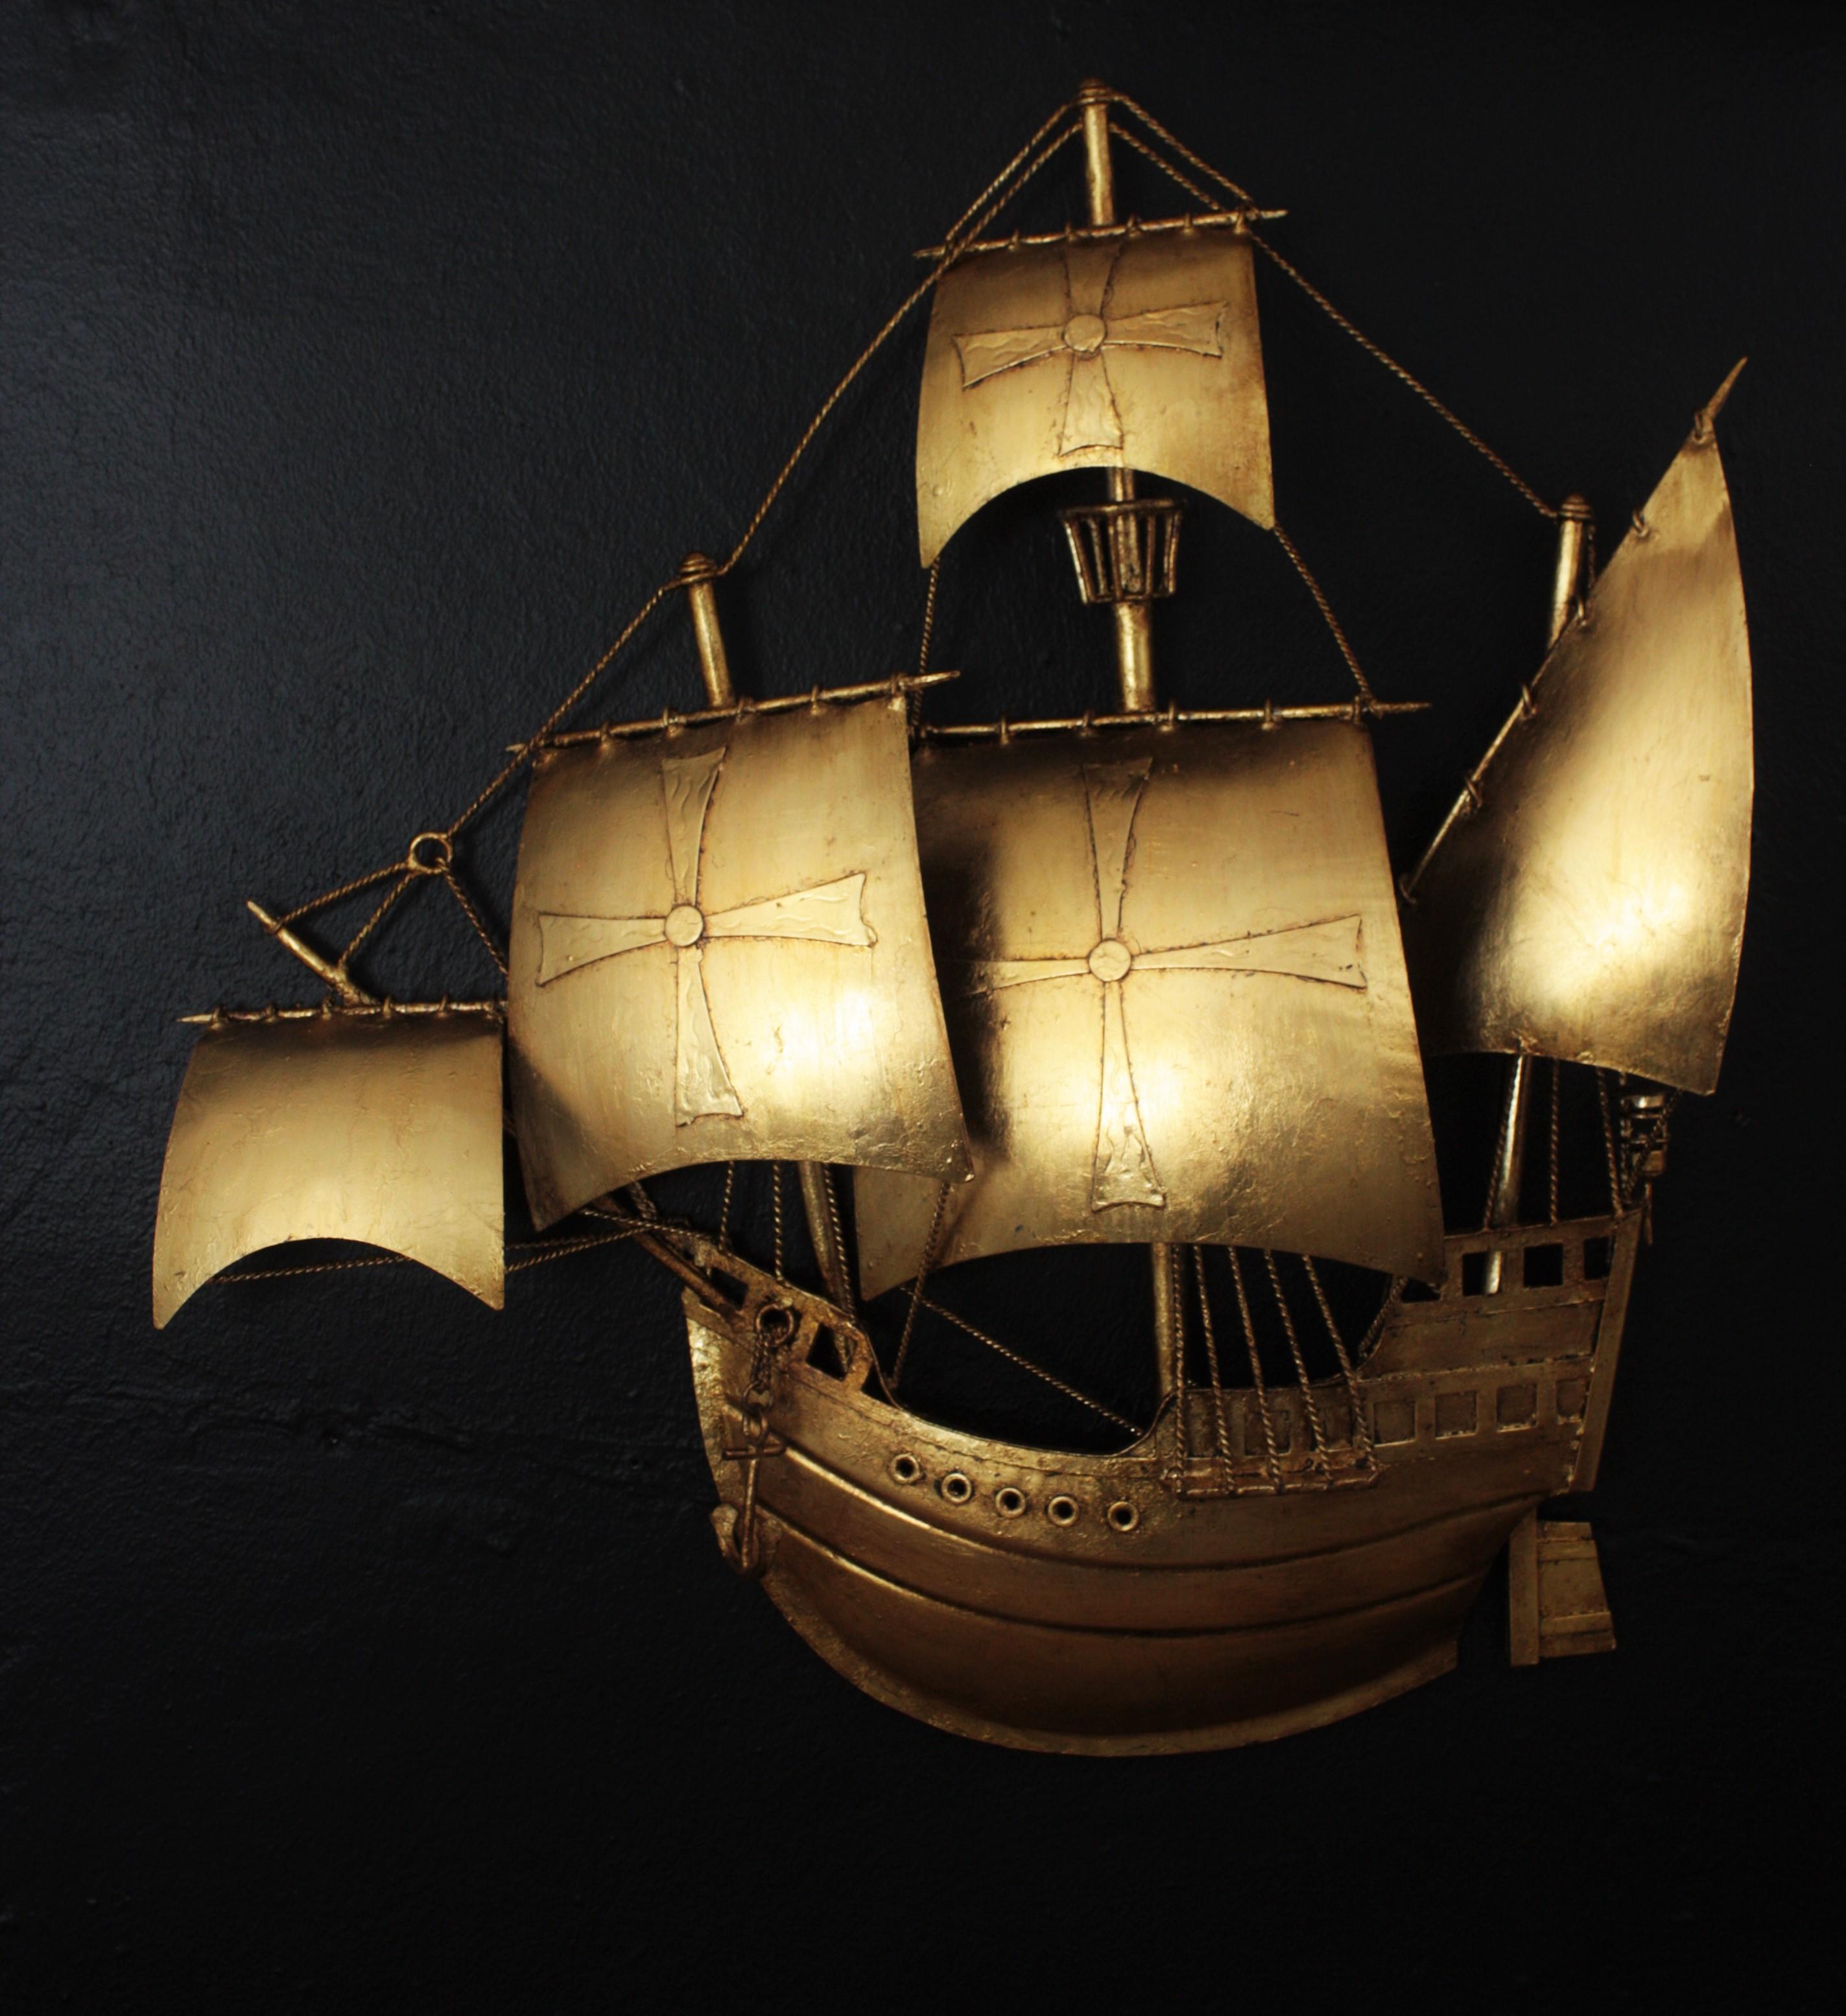 Spanish galleon or sailing ship wall sconce, gilt iron. Spain, 1950s
In the style of Gilbert Poillerat.
This spanish galleon wall light was handcrafted in Spain at the mid-20th century period representing the Santa Maria, the flagship of the three